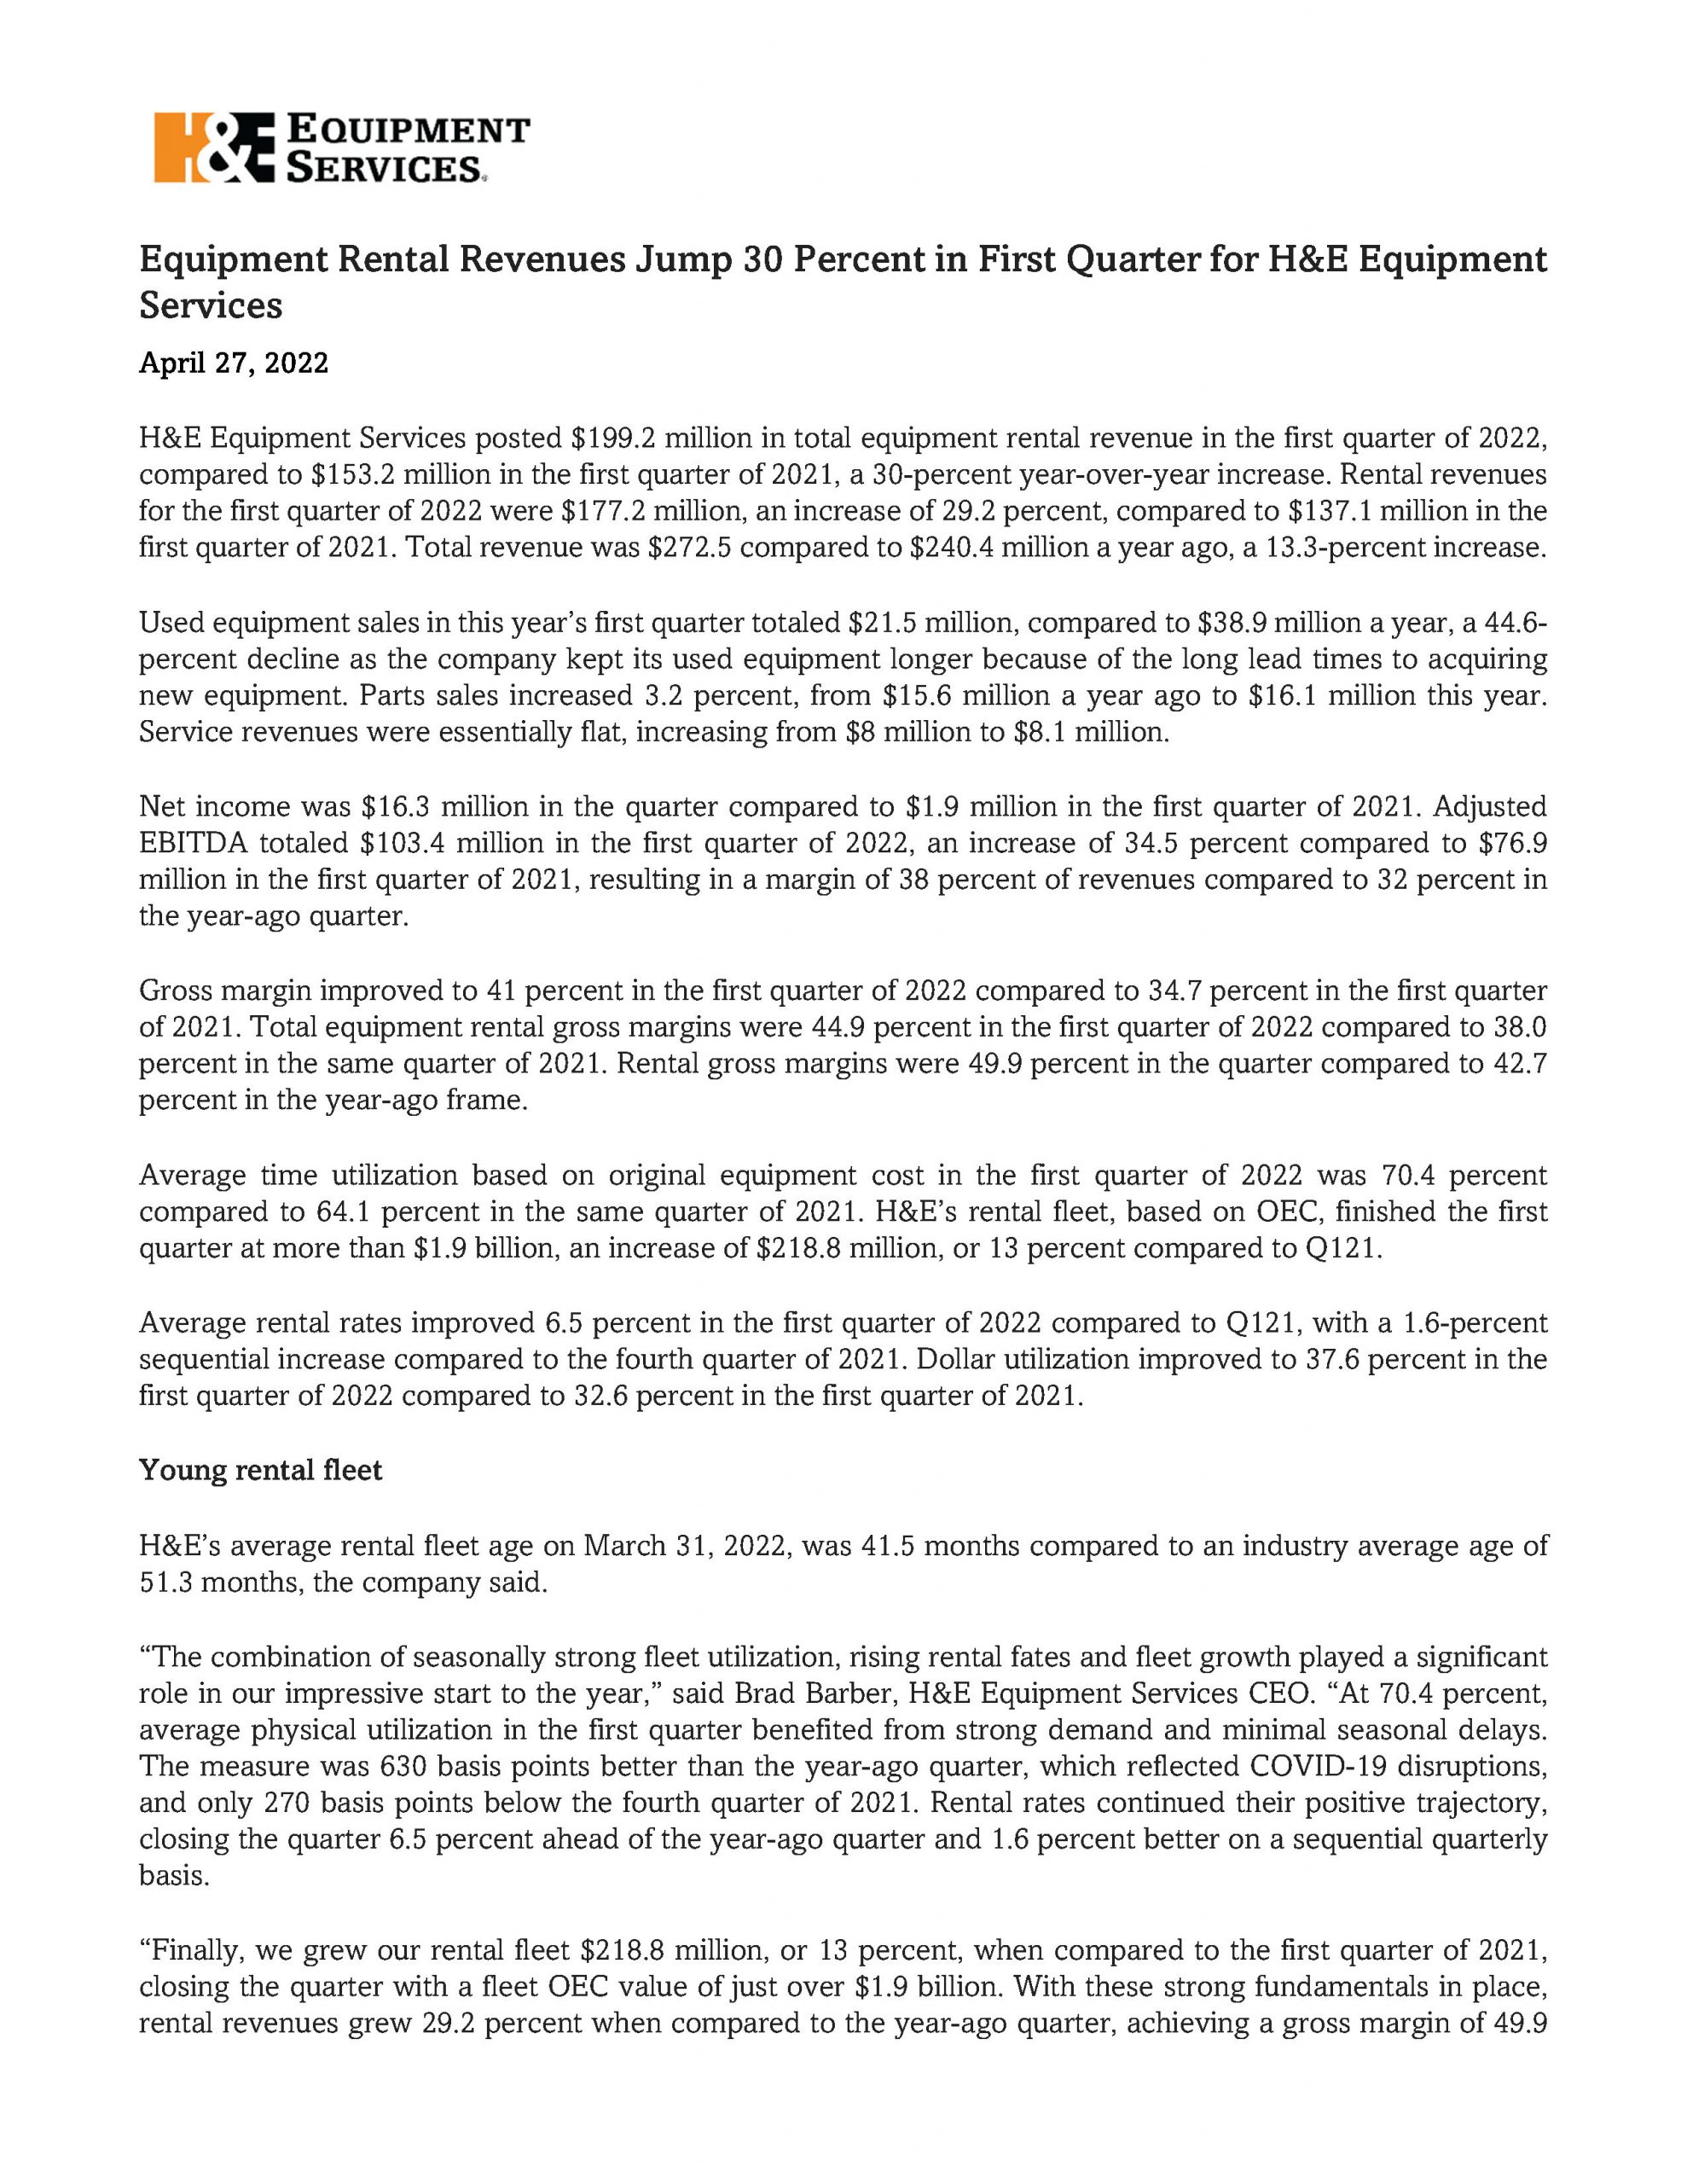 Equipment Rental Revenues Jump 30 Percent in First Quarter for H&E Equipment Services 4.27.2022